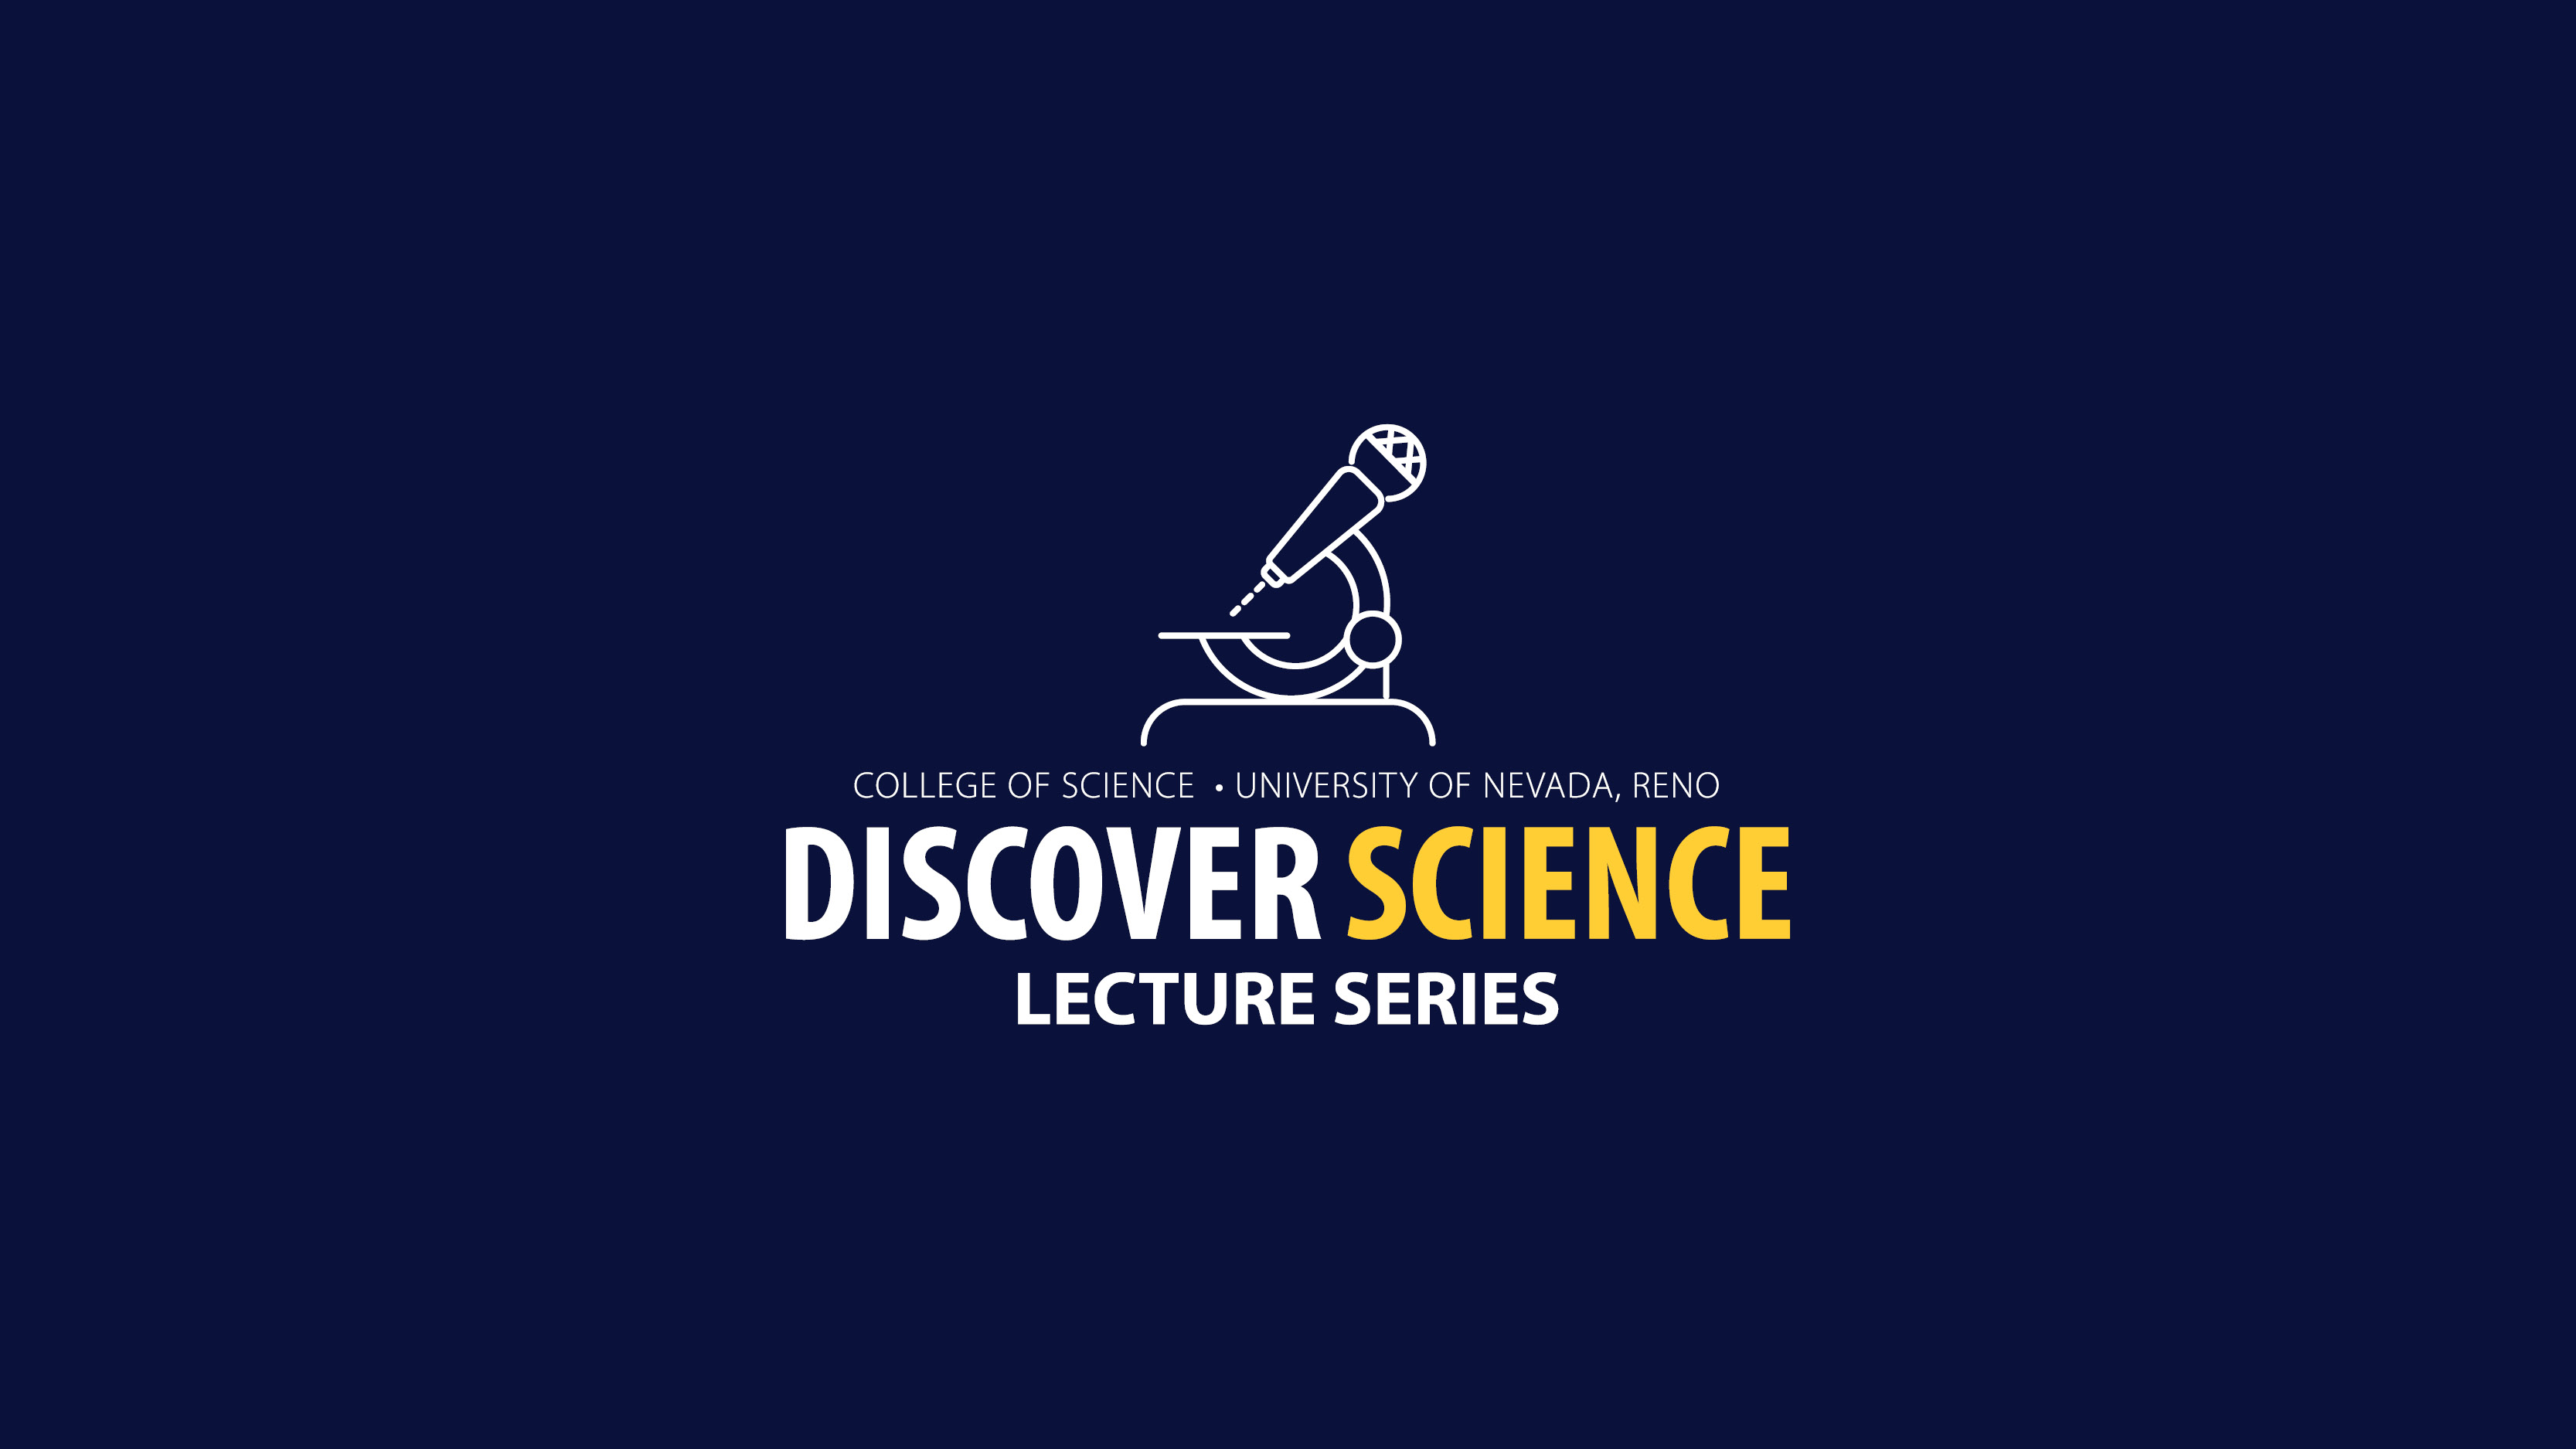 Discover Science Lecture Series identifier on blue background